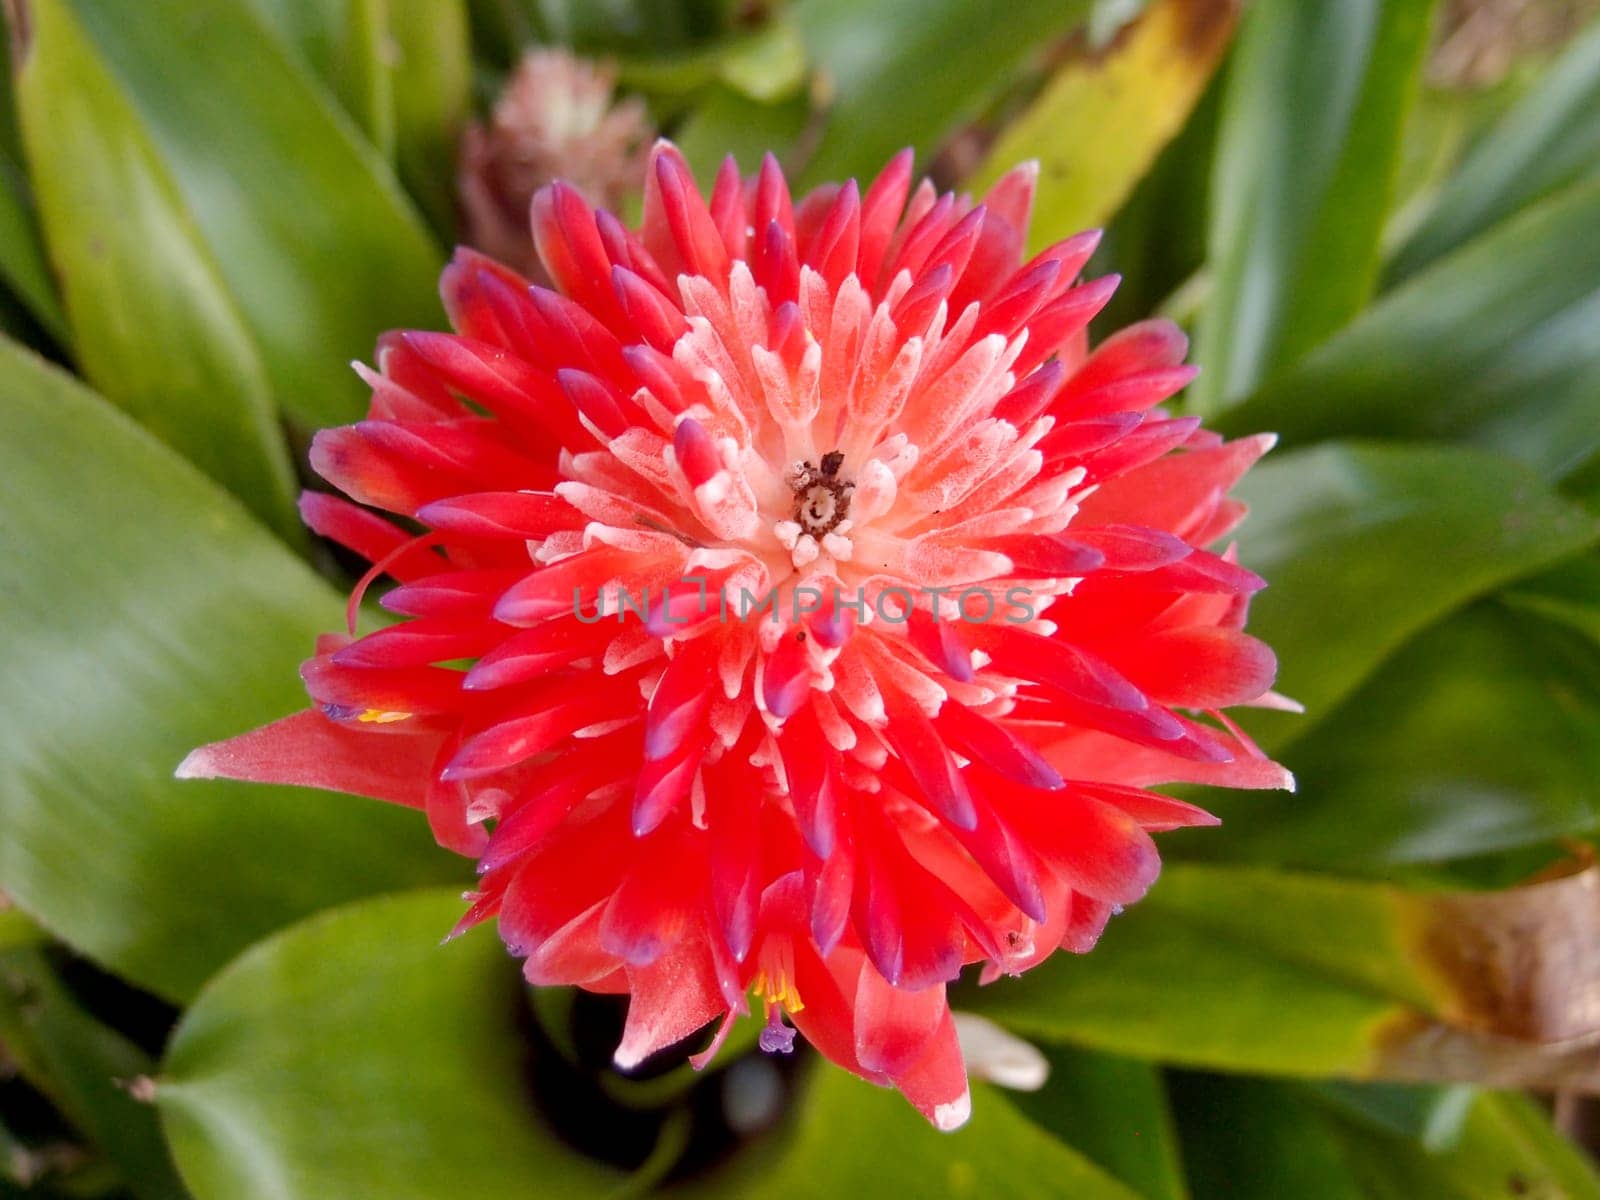 Red Bromeliads Flower by EricGBVD